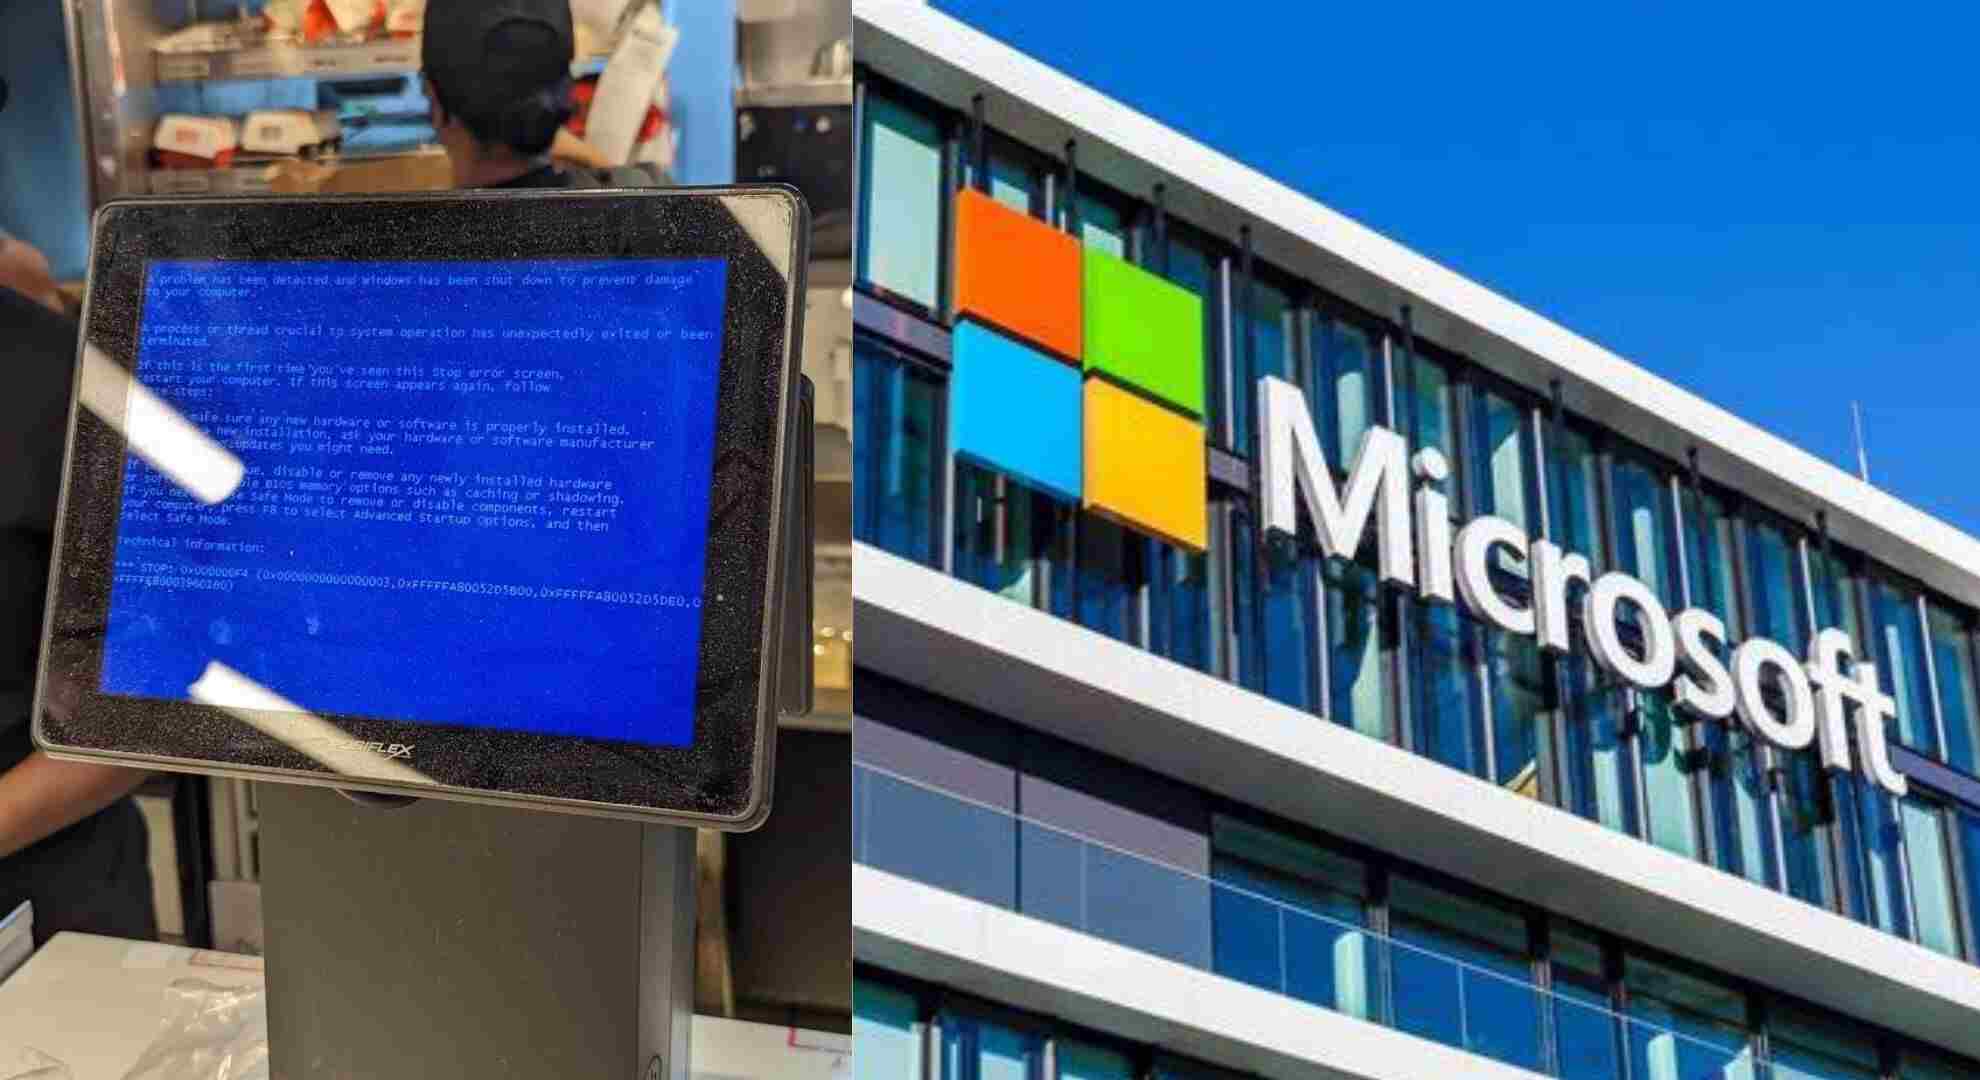 Global Microsoft Glitch Causes Disruptions In Himachal Pradesh Health Services